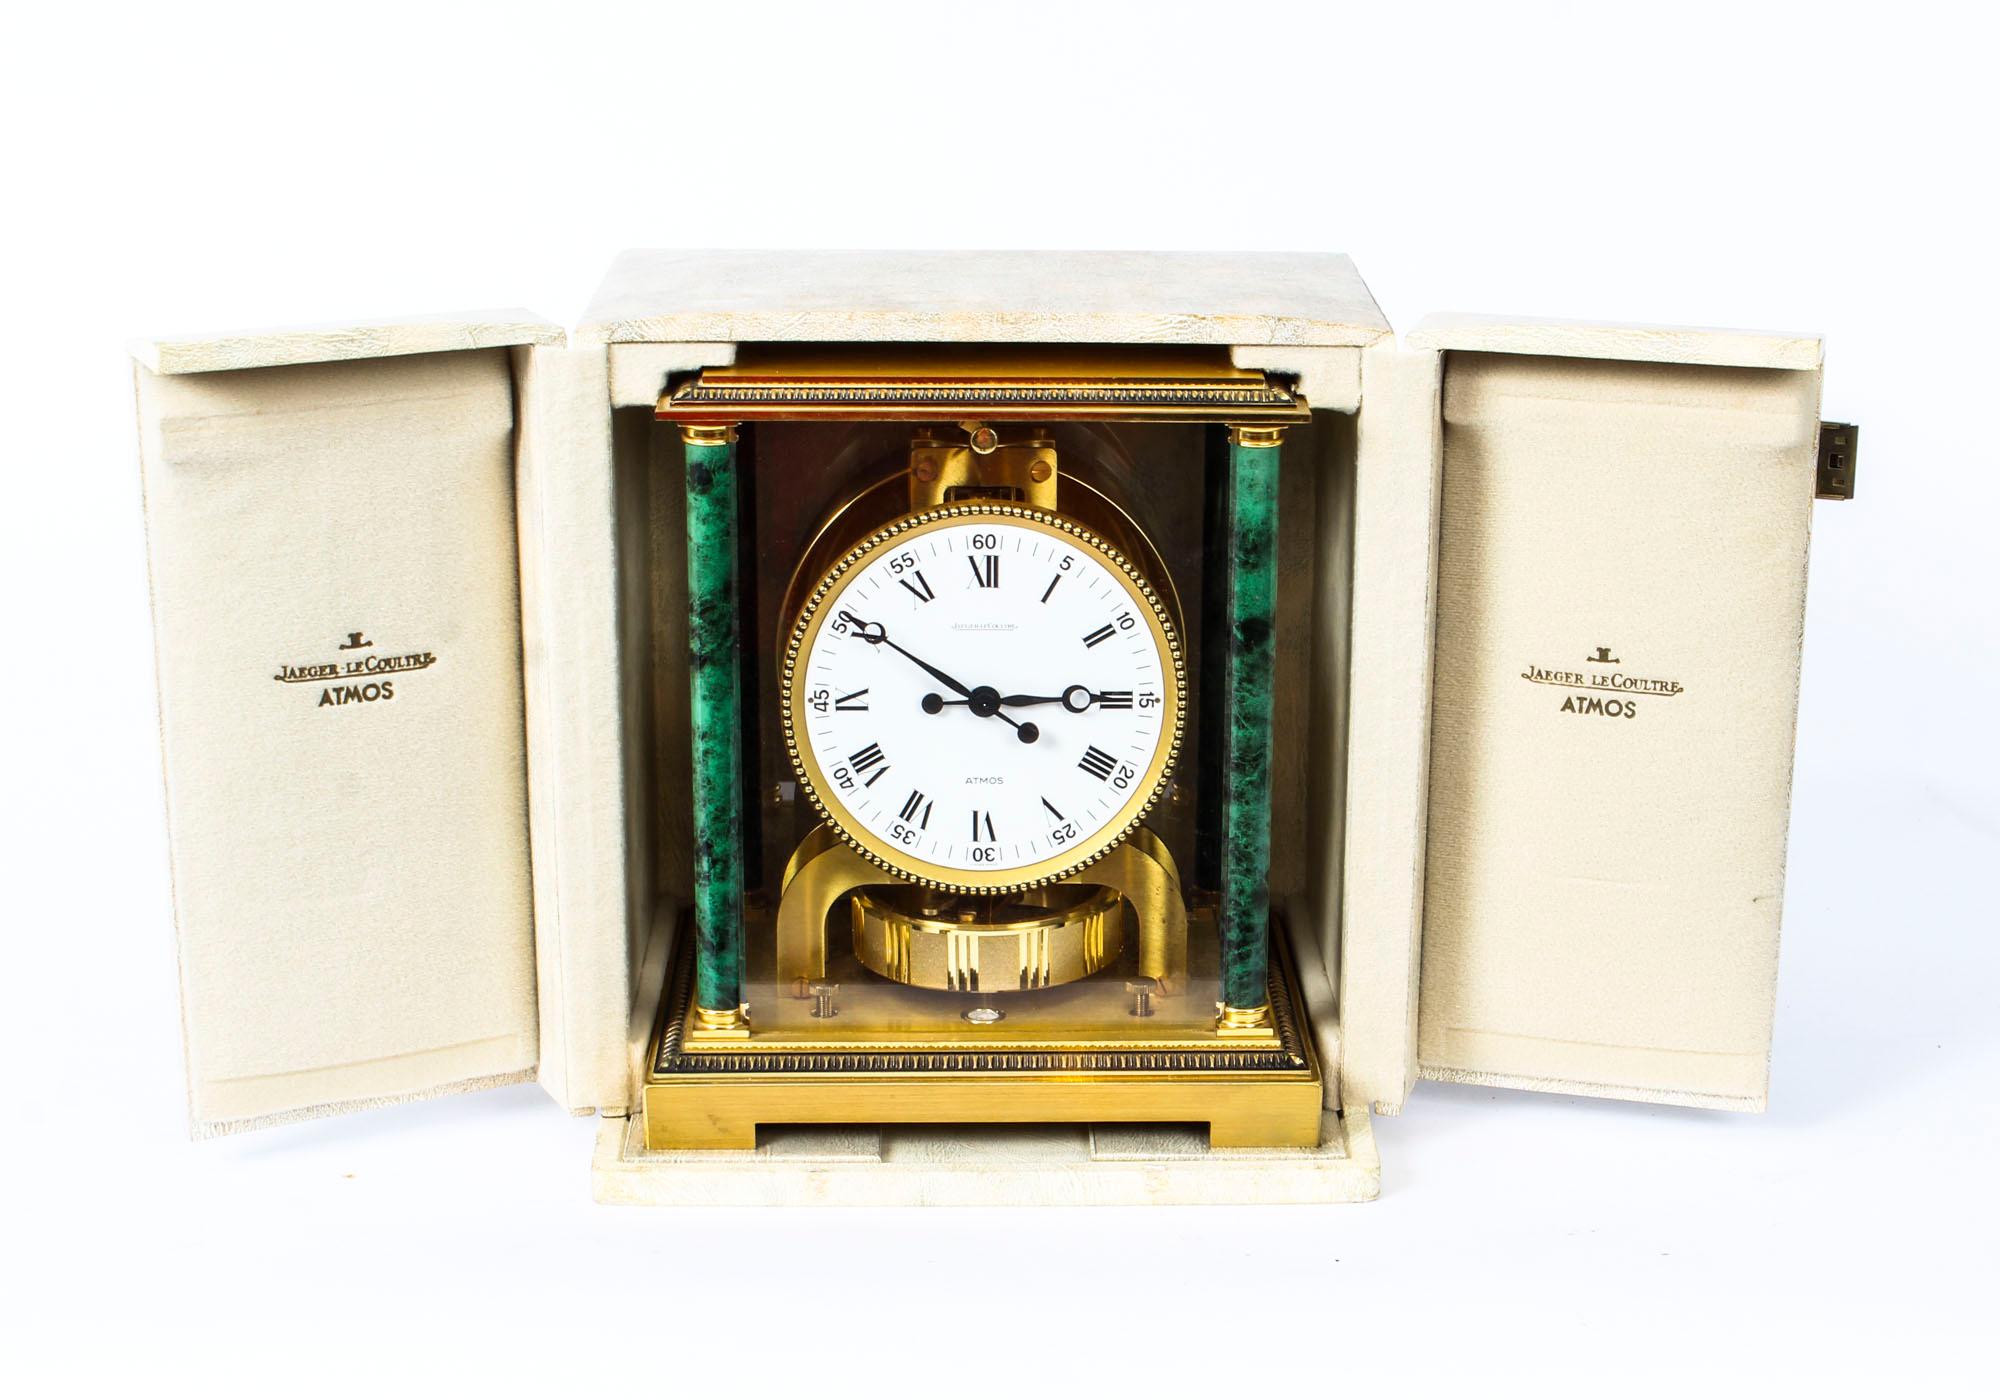 This is a very elegant Vintage Vendome Atmos perpetual mantle clock by Jaeger-LeCoultre, bearing their ref No. 344108, with original operating booklet and original outer case, packaging , and guarantee dated 12th January 1973.

The clock is